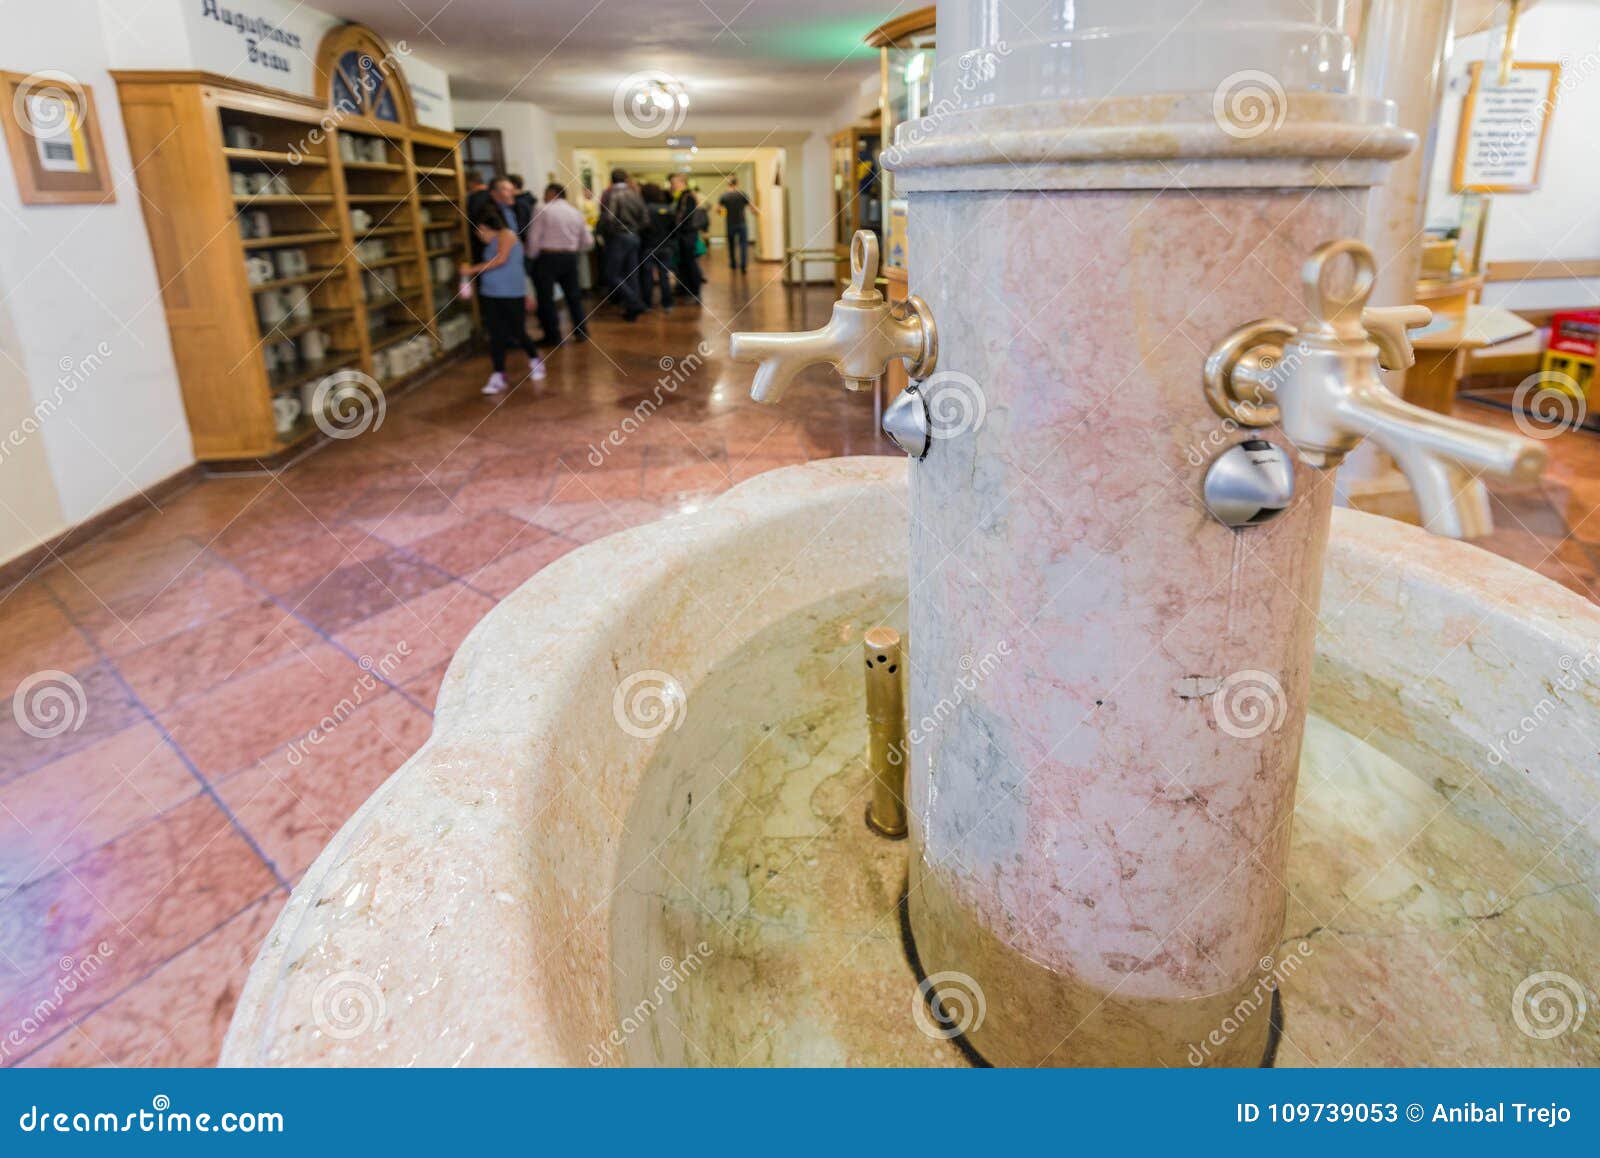 Augustiner Brewery At Mulln Salzburg Austria Editorial Stock Photo Image Of Attraction Tourism